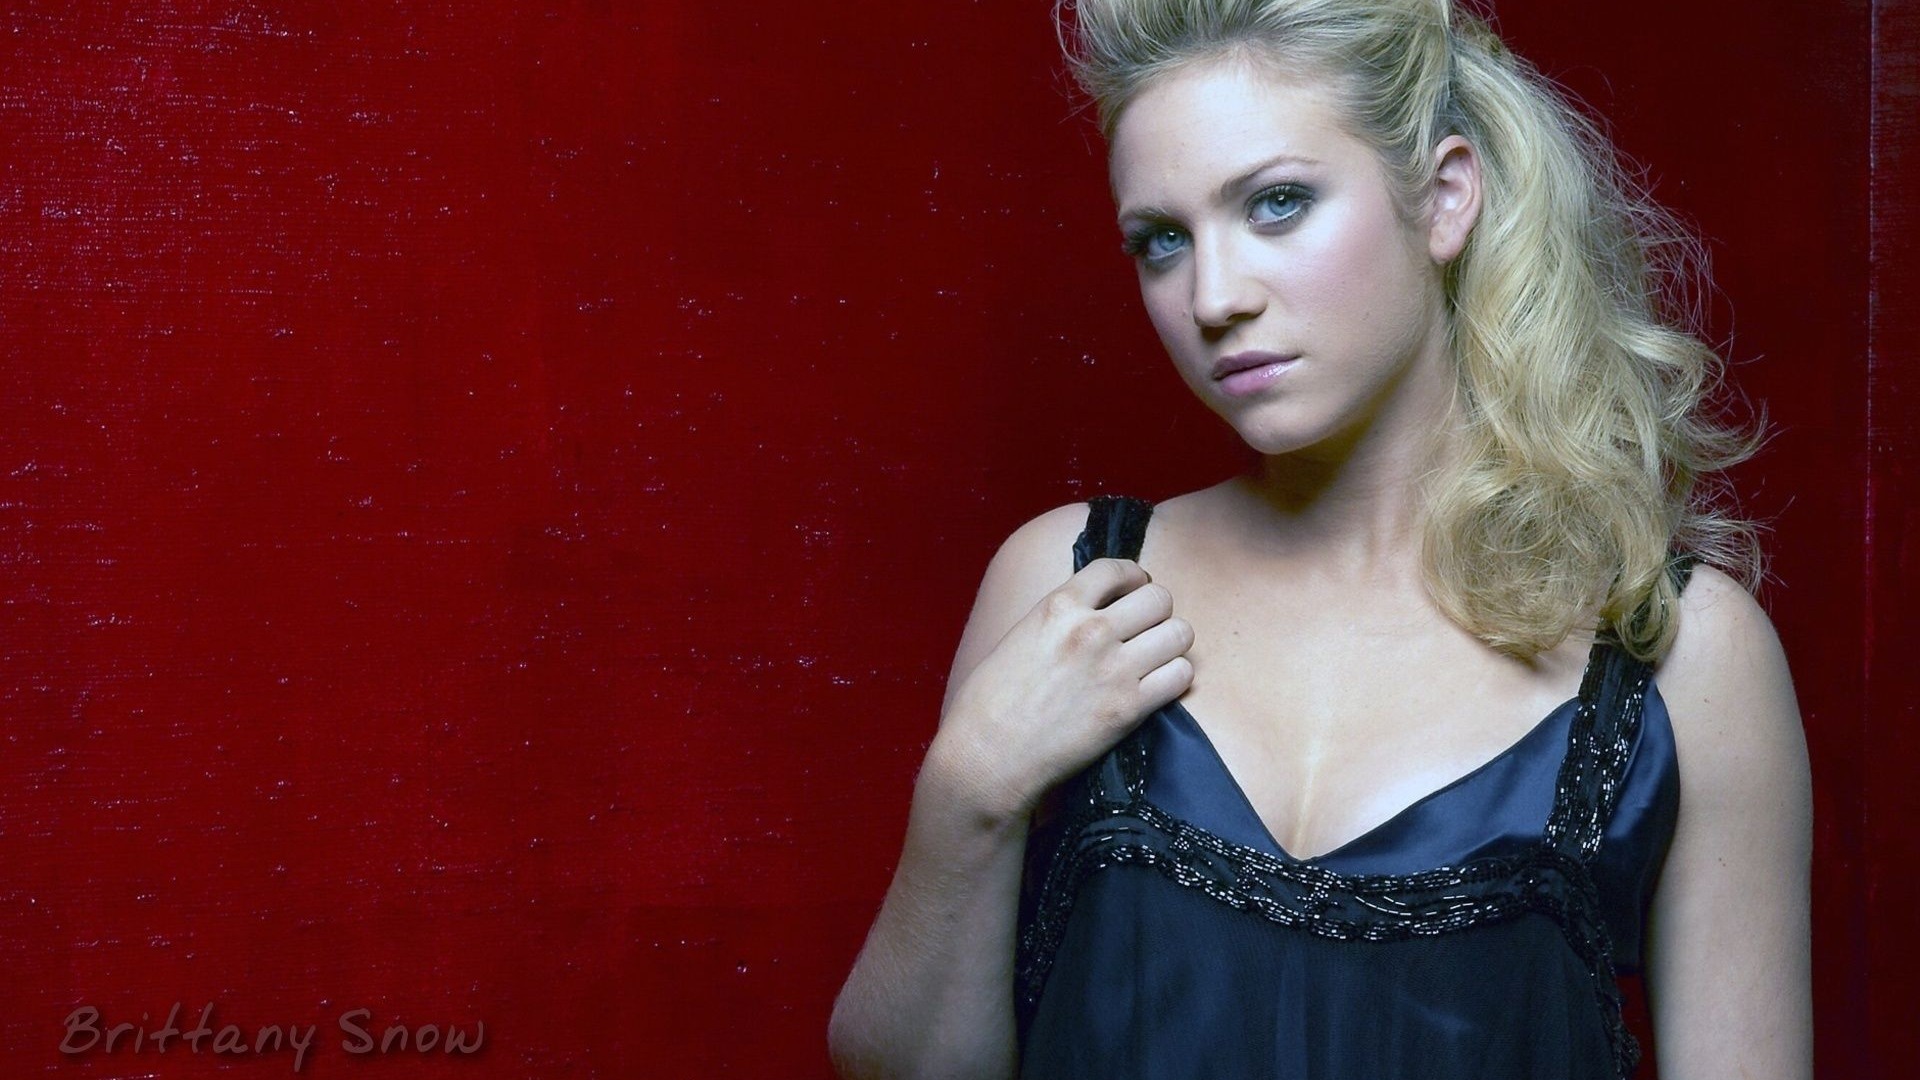 Brittany Snow #007 - 1920x1080 Wallpapers Pictures Photos Images